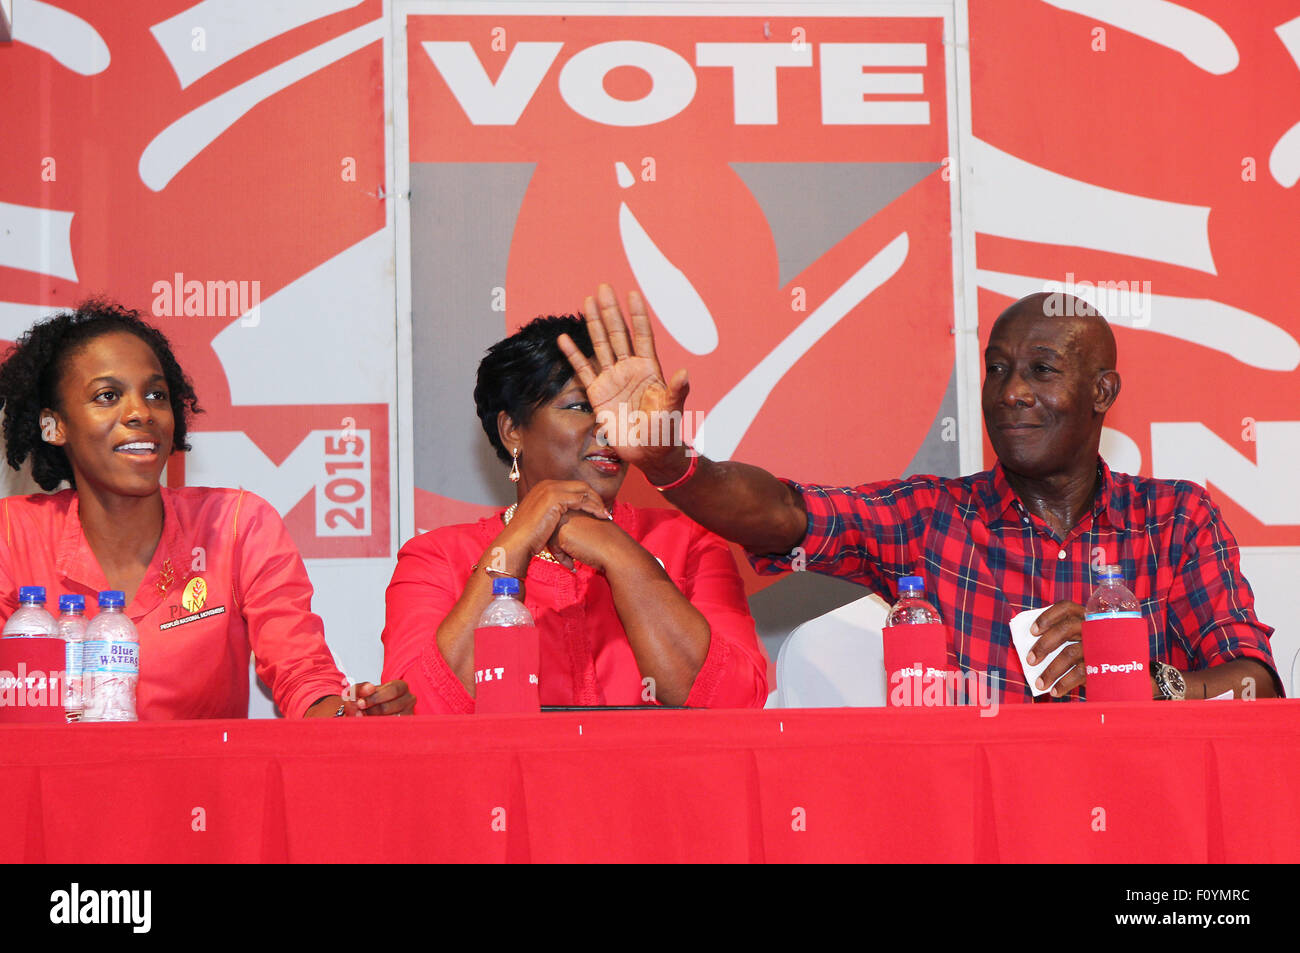 Arouca, Trinidad. 22nd August, 2015. Dr. Keith Christopher Rowley (R), Leader of Opposition and Member of the House of Representatives for Diego Martin West waves to supporters at a rally for People's National Movement (PNM) constituents of Lopinot/Bon Aire West during the General Elections campaign on August 22, 2015 in Arouca, Trinidad.  Dr. Rowley is the candidate of the People's National Movement to become Prime Minister when elections are held on September 07, 2015.  (Photo by Sean Drakes/Alamy Live News) Stock Photo